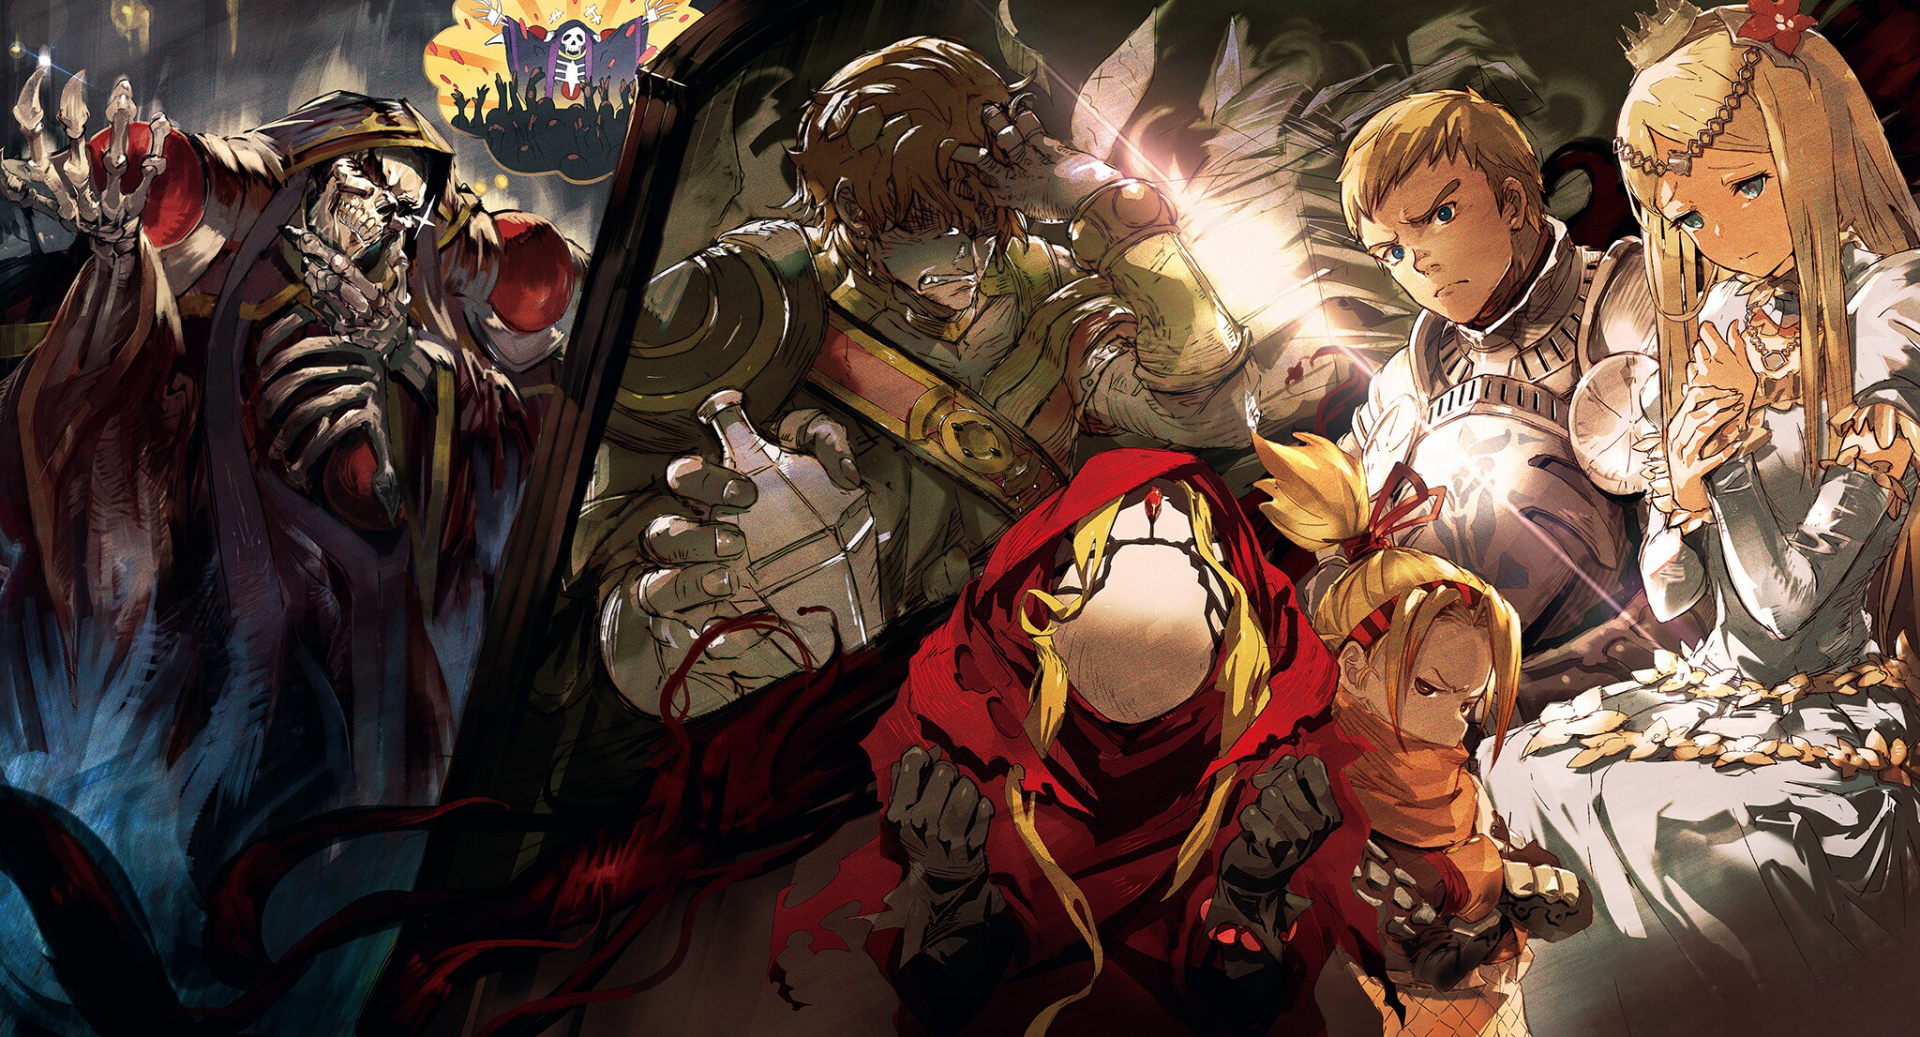 Overlord HD Wallpaper | Background Image | 2048x1106 | ID ...